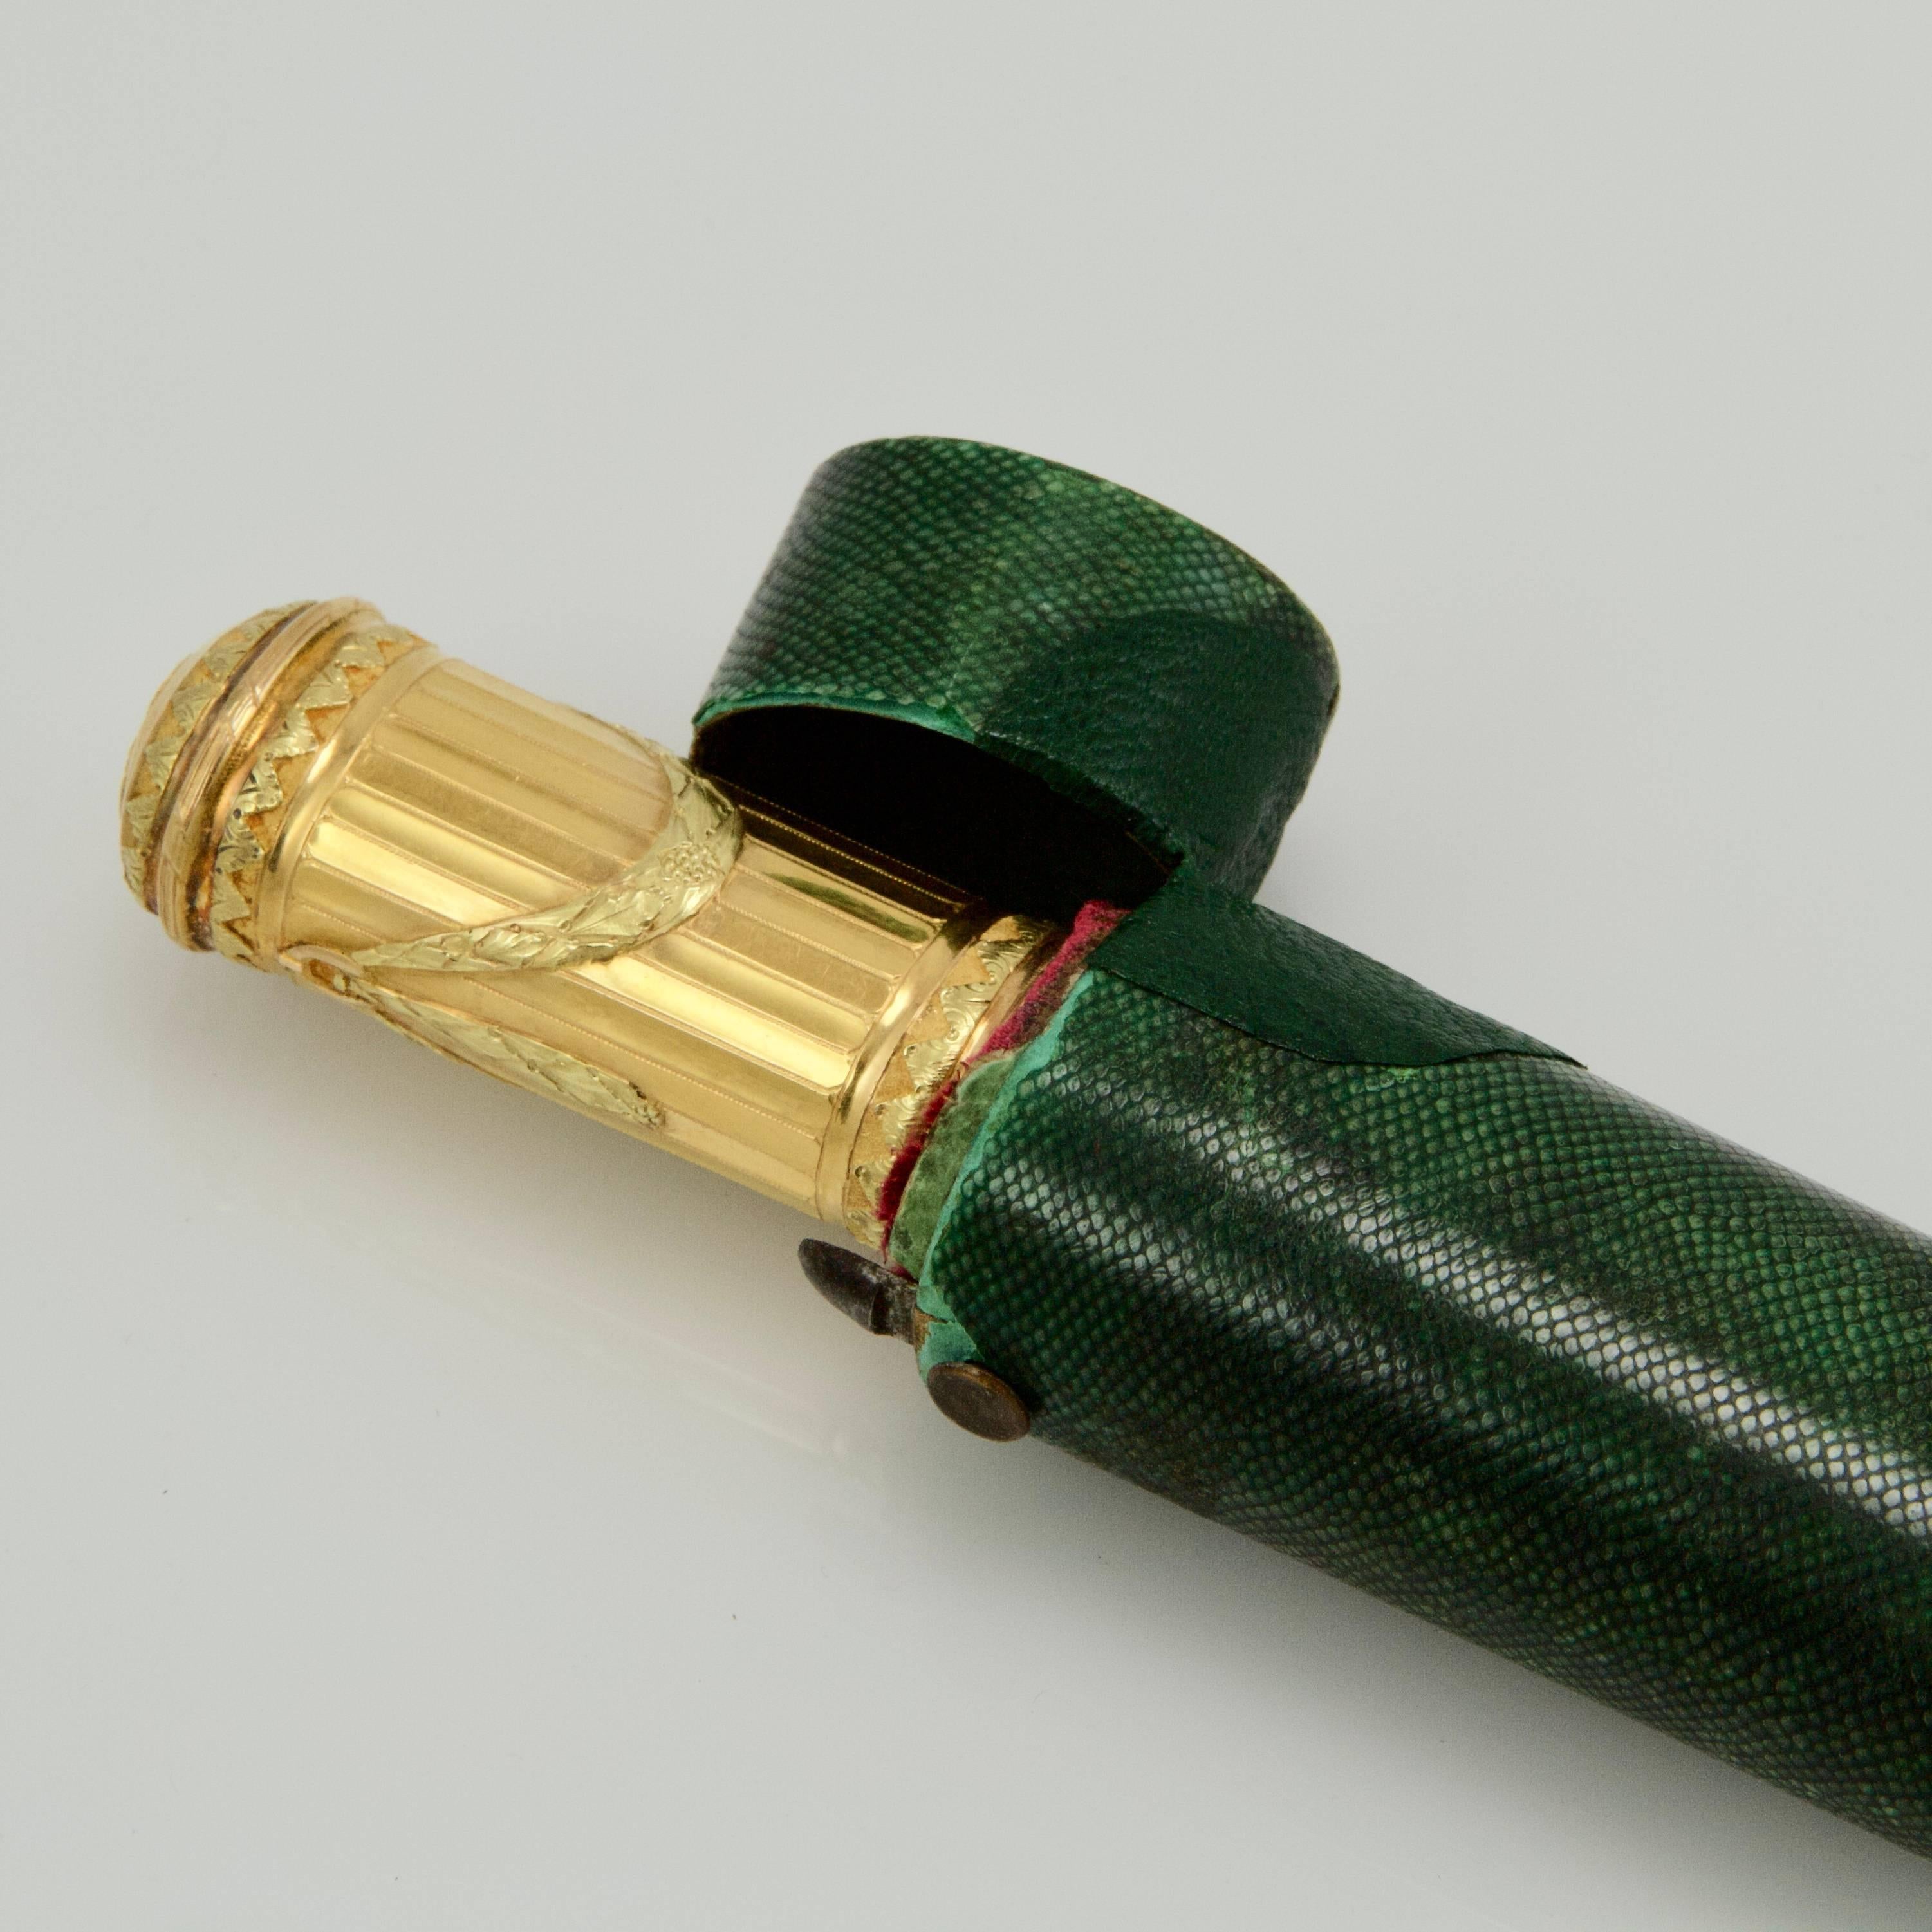 Of traditional tapering oval form, made in two removable parts, a sealing-wax case decorated with green gold laurel frise on burnishing yellow gold stripes.
Top decorated with a 